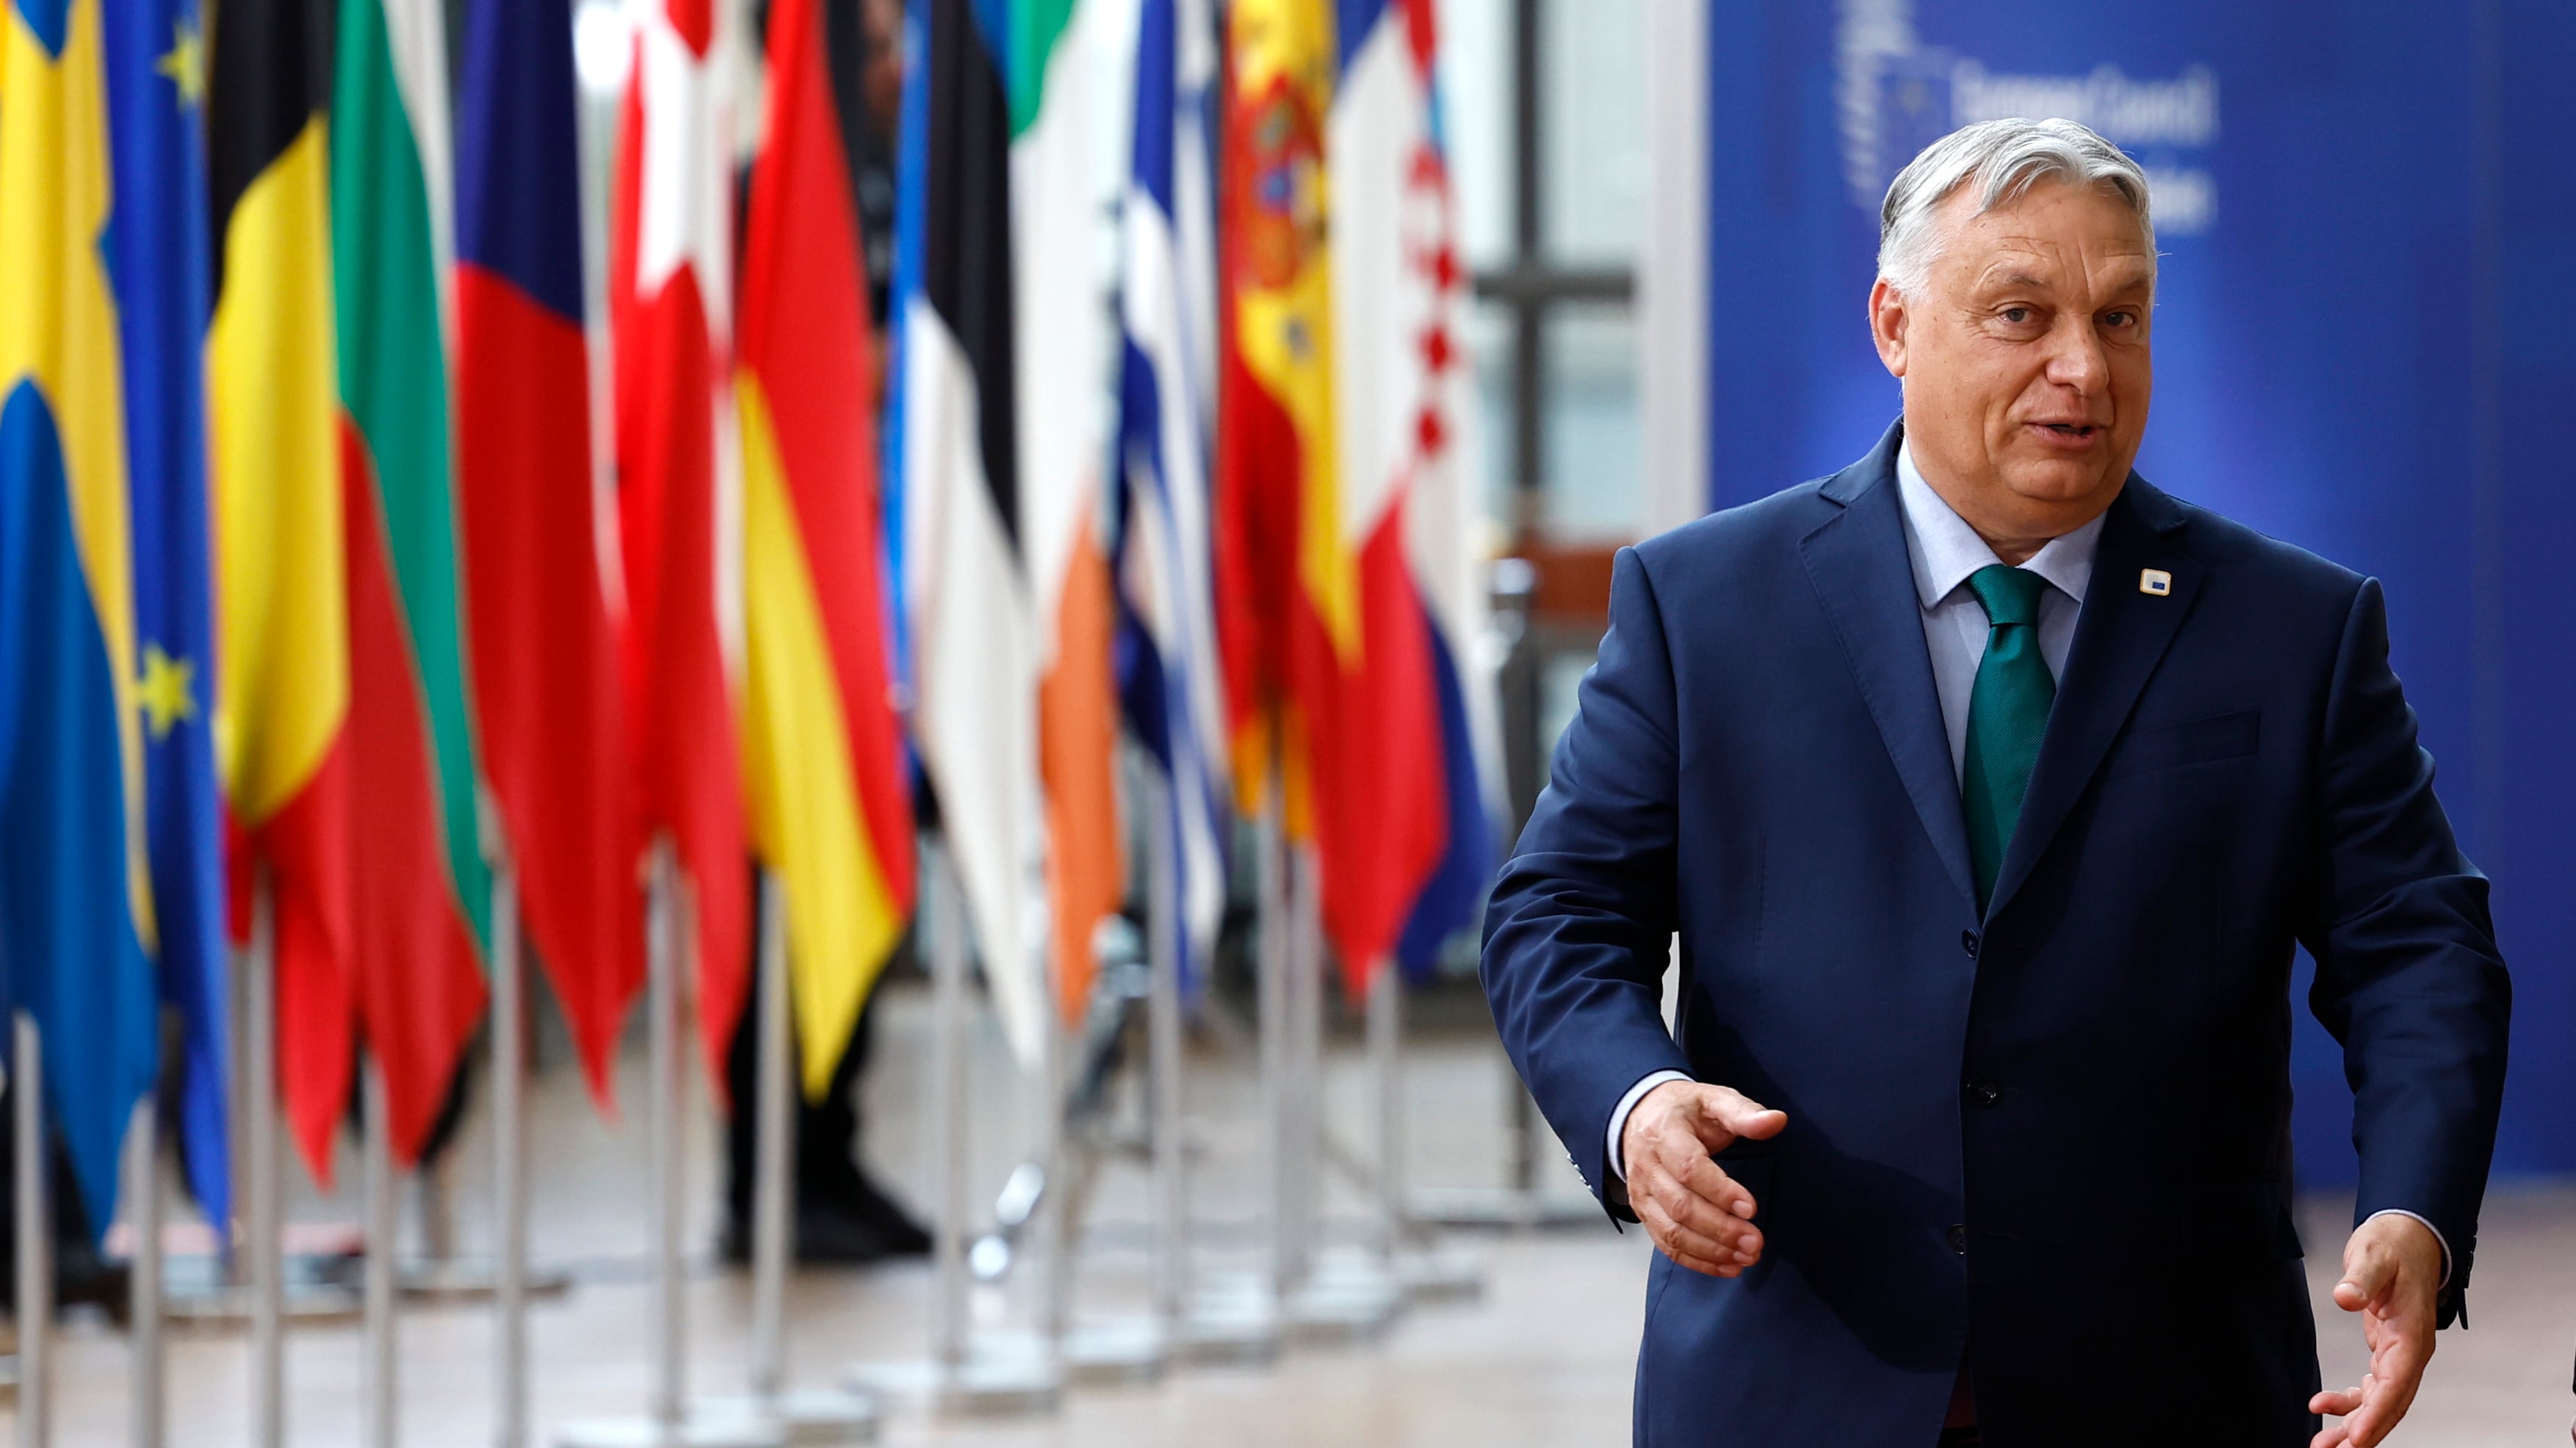 Hungarian PM Viktor Orban has presented a new alliance with Austria’s far-right Freedom Party and main Czech opposition party Ano, which hopes to attract other partners and become the biggest right-wing group in the European Parliament (Geert Vanden Wijngaert/AP)